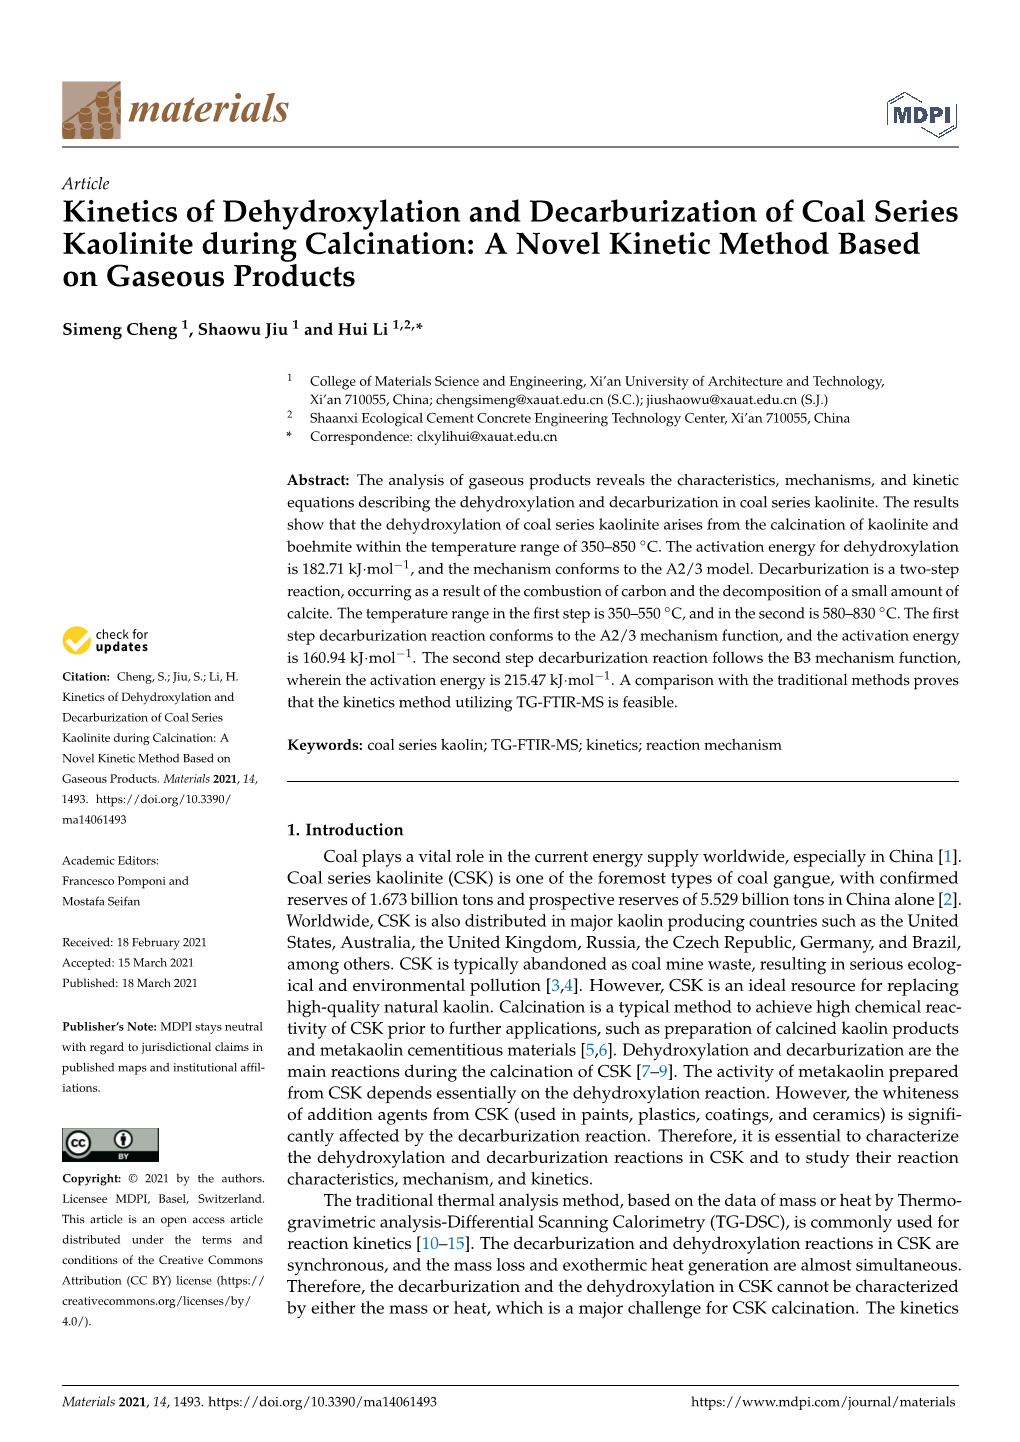 Kinetics of Dehydroxylation and Decarburization of Coal Series Kaolinite During Calcination: a Novel Kinetic Method Based on Gaseous Products